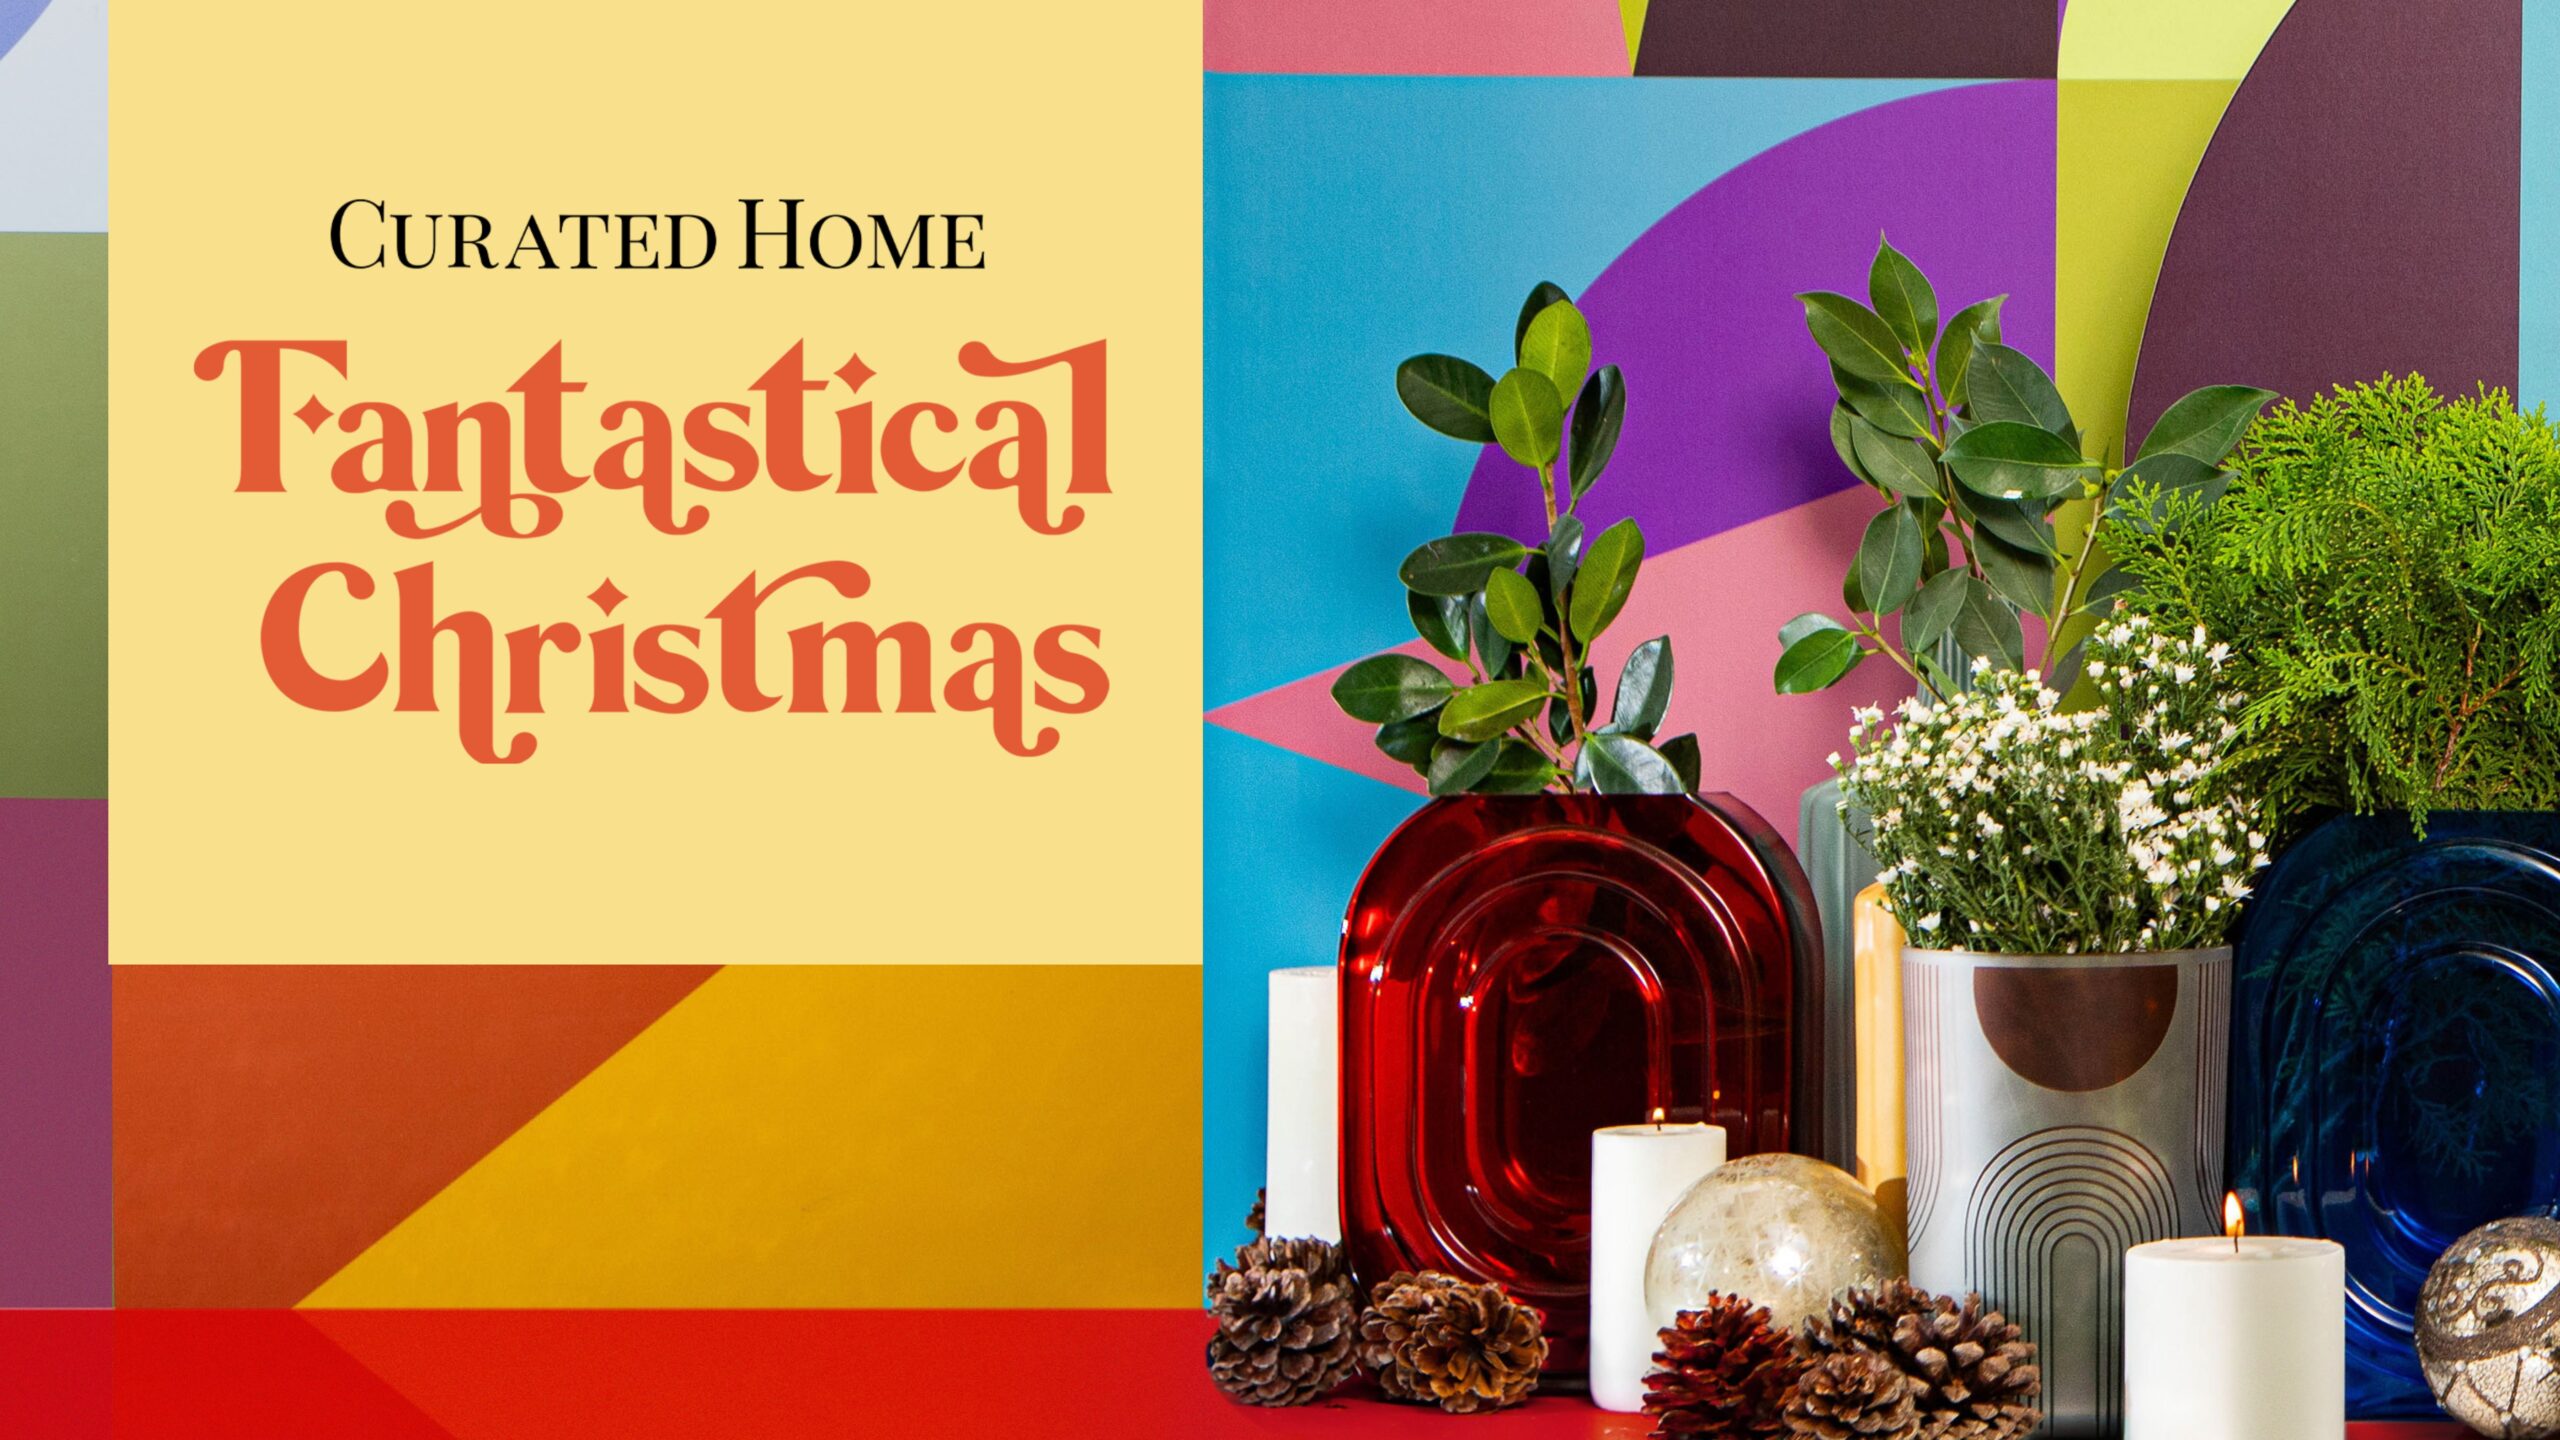 Curated Home's Fantastical Christmas Holiday